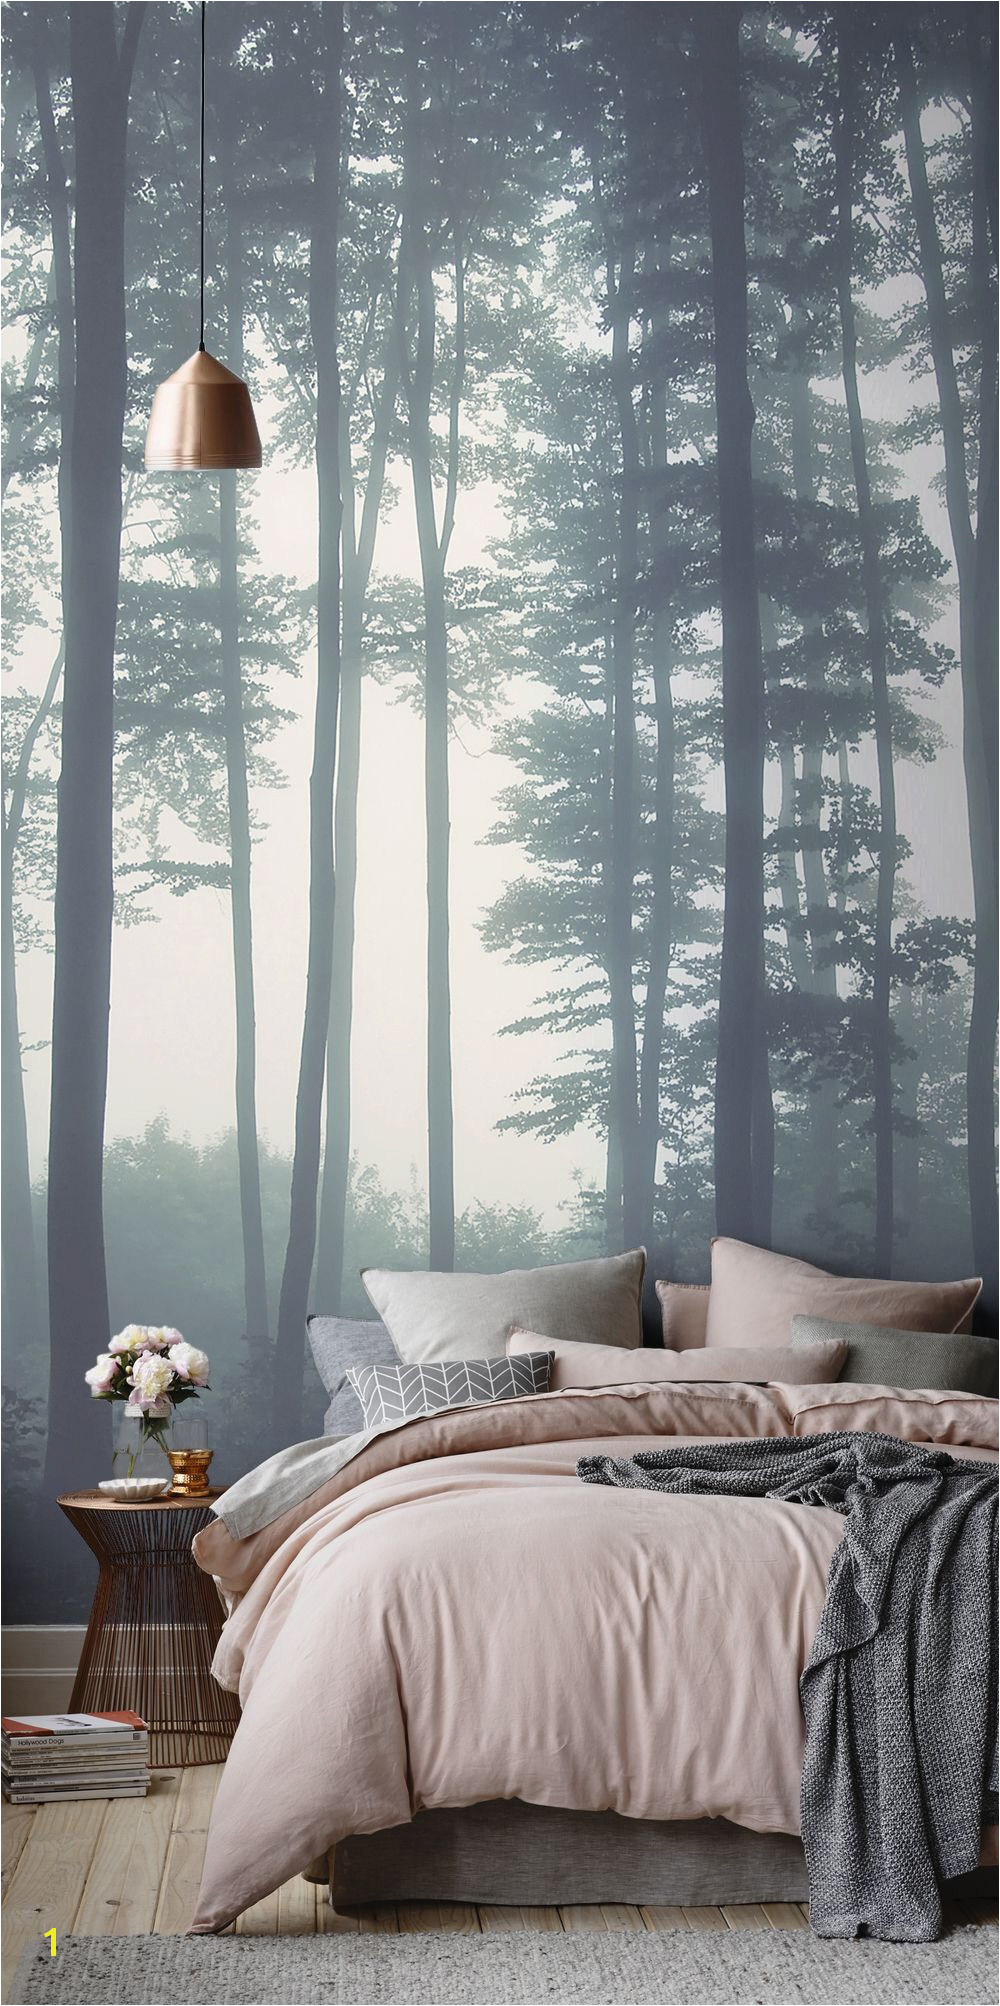 A Perfect Day Wall Mural Sea Of Trees forest Mural Wallpaper